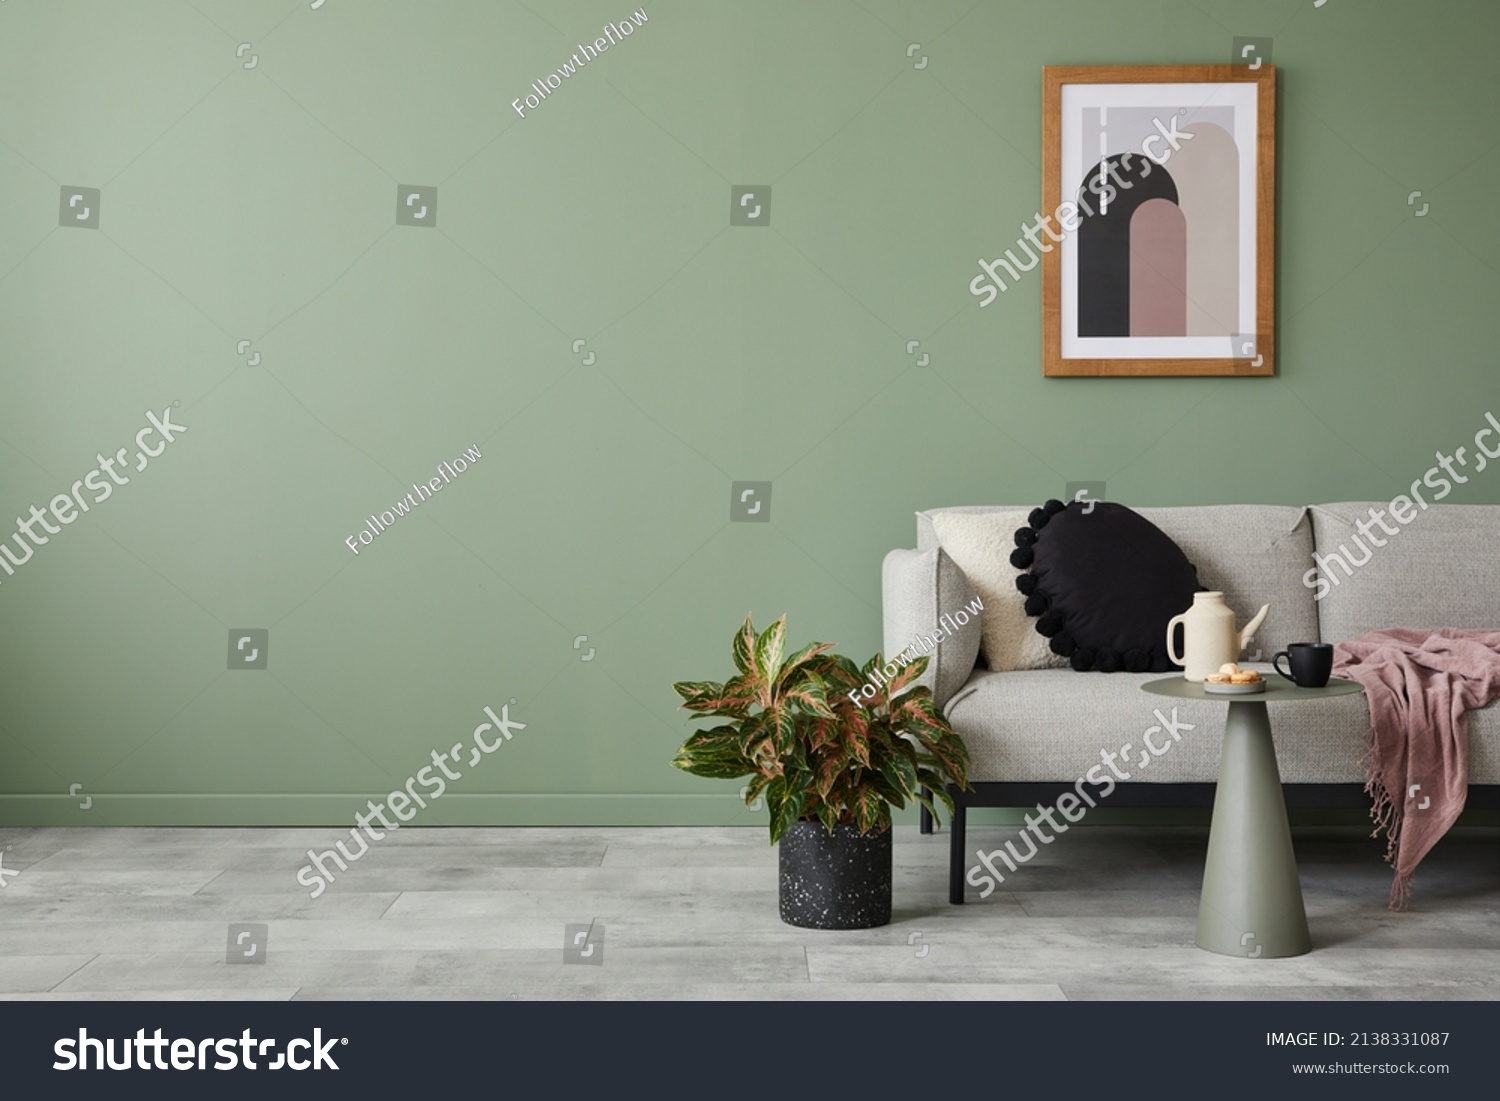 Creative living room interior composition with modern sofa, home decorations and personal accessories. Eucalyptus wall. Template. Copy space. #2138331087